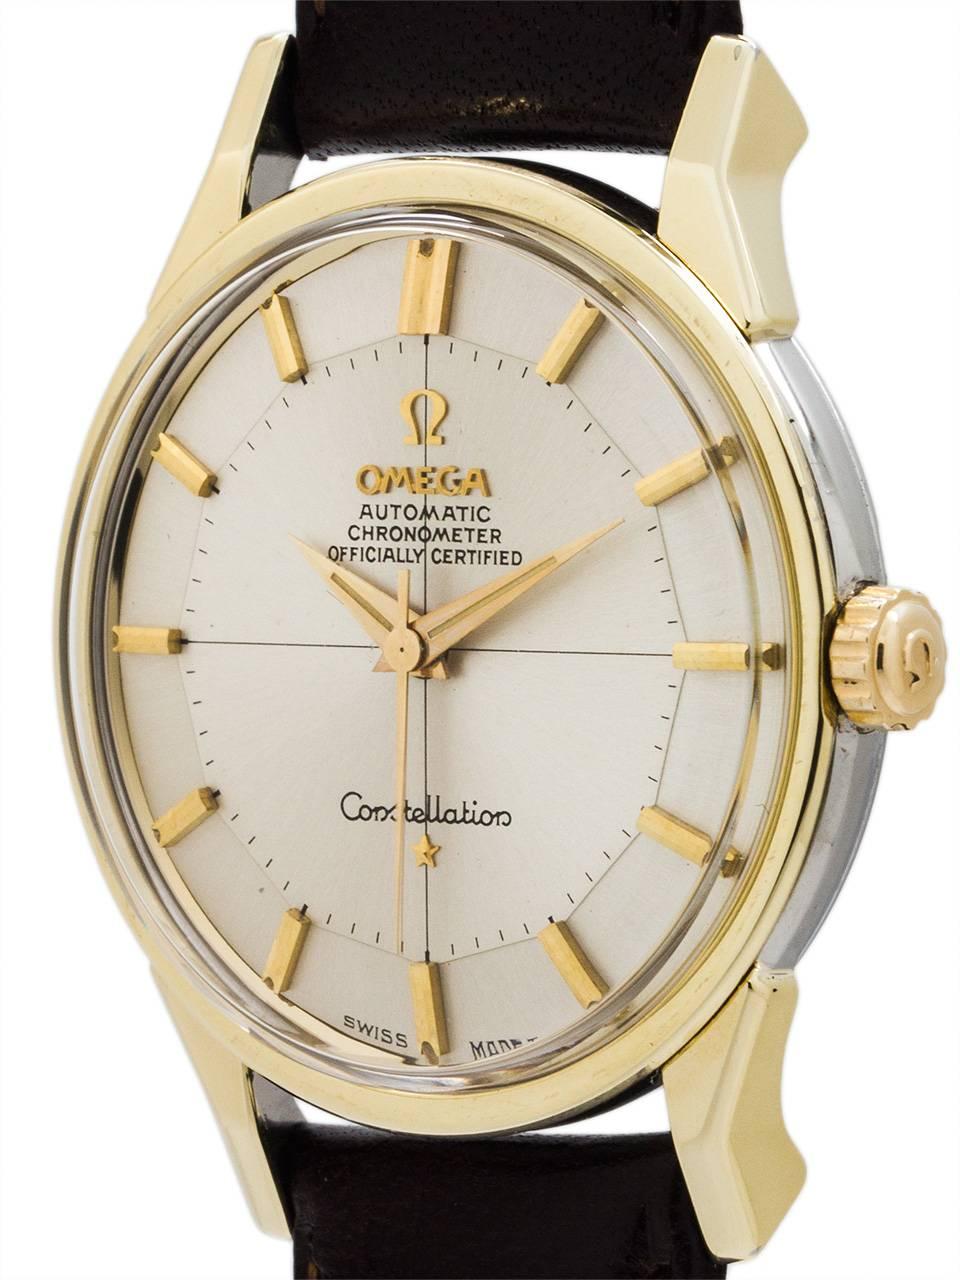 Very clean example Omega Constellation ref 167.005 movement serial # 24.4 million circa 1967. Featuring 34 x 43mm gold shell case with screw down stainless steel case back with embossed gold Observatory logo, extended “elbow” lugs, acrylic crystal,